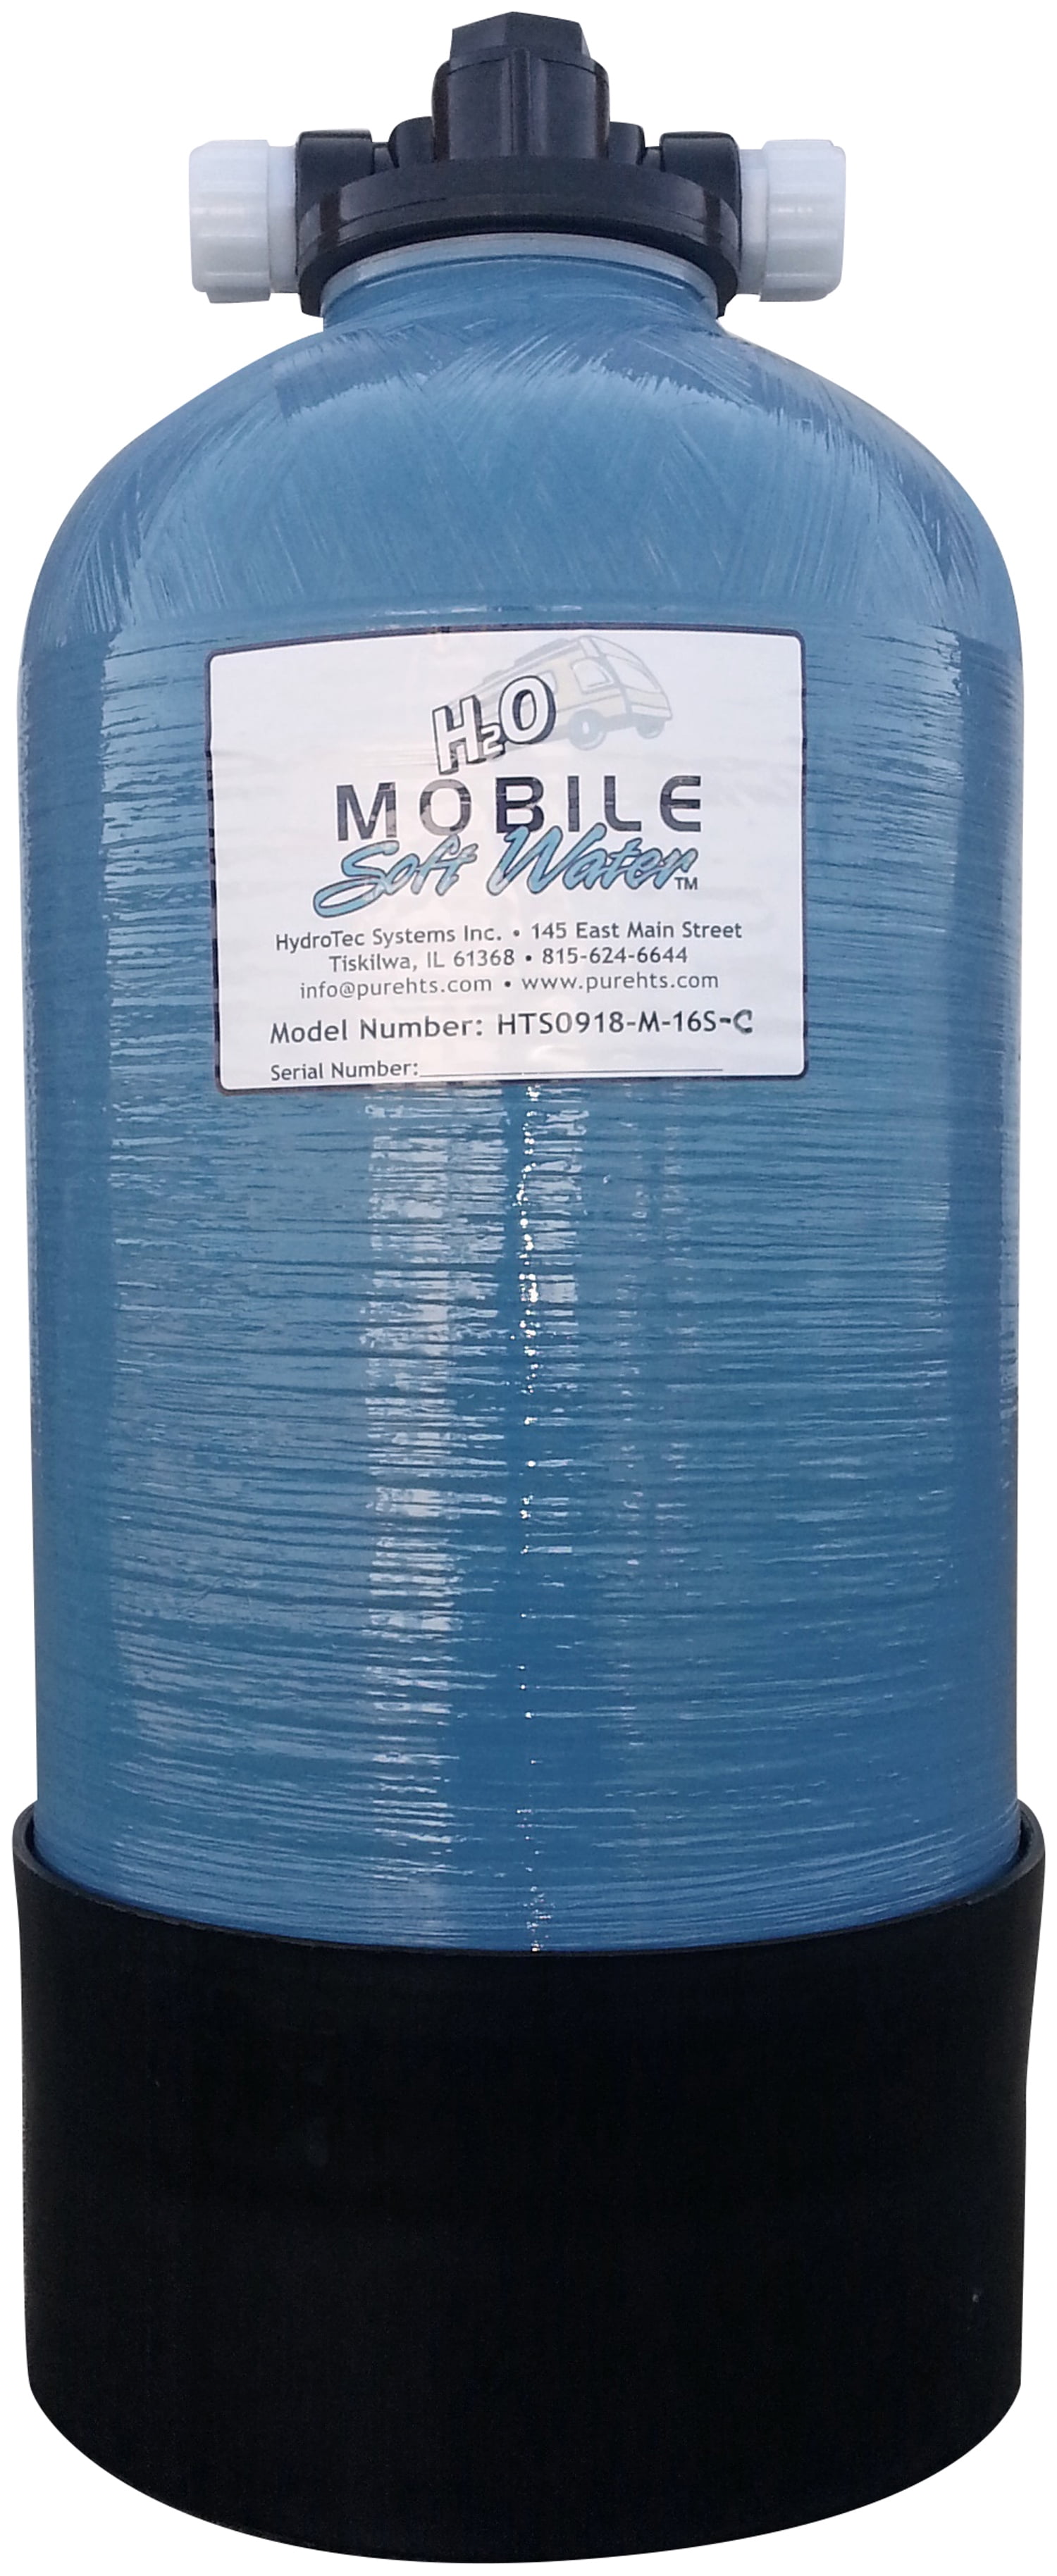 R Portable 16,000 Grain Softener, Tank Head, Lead-Free NSF 61 Male GHC Connections, Distributor, Resin, and Instructions. with Lead-Free Brass Inlet and Outlet Quick Disconnects. MOBILE SOFT WATER 